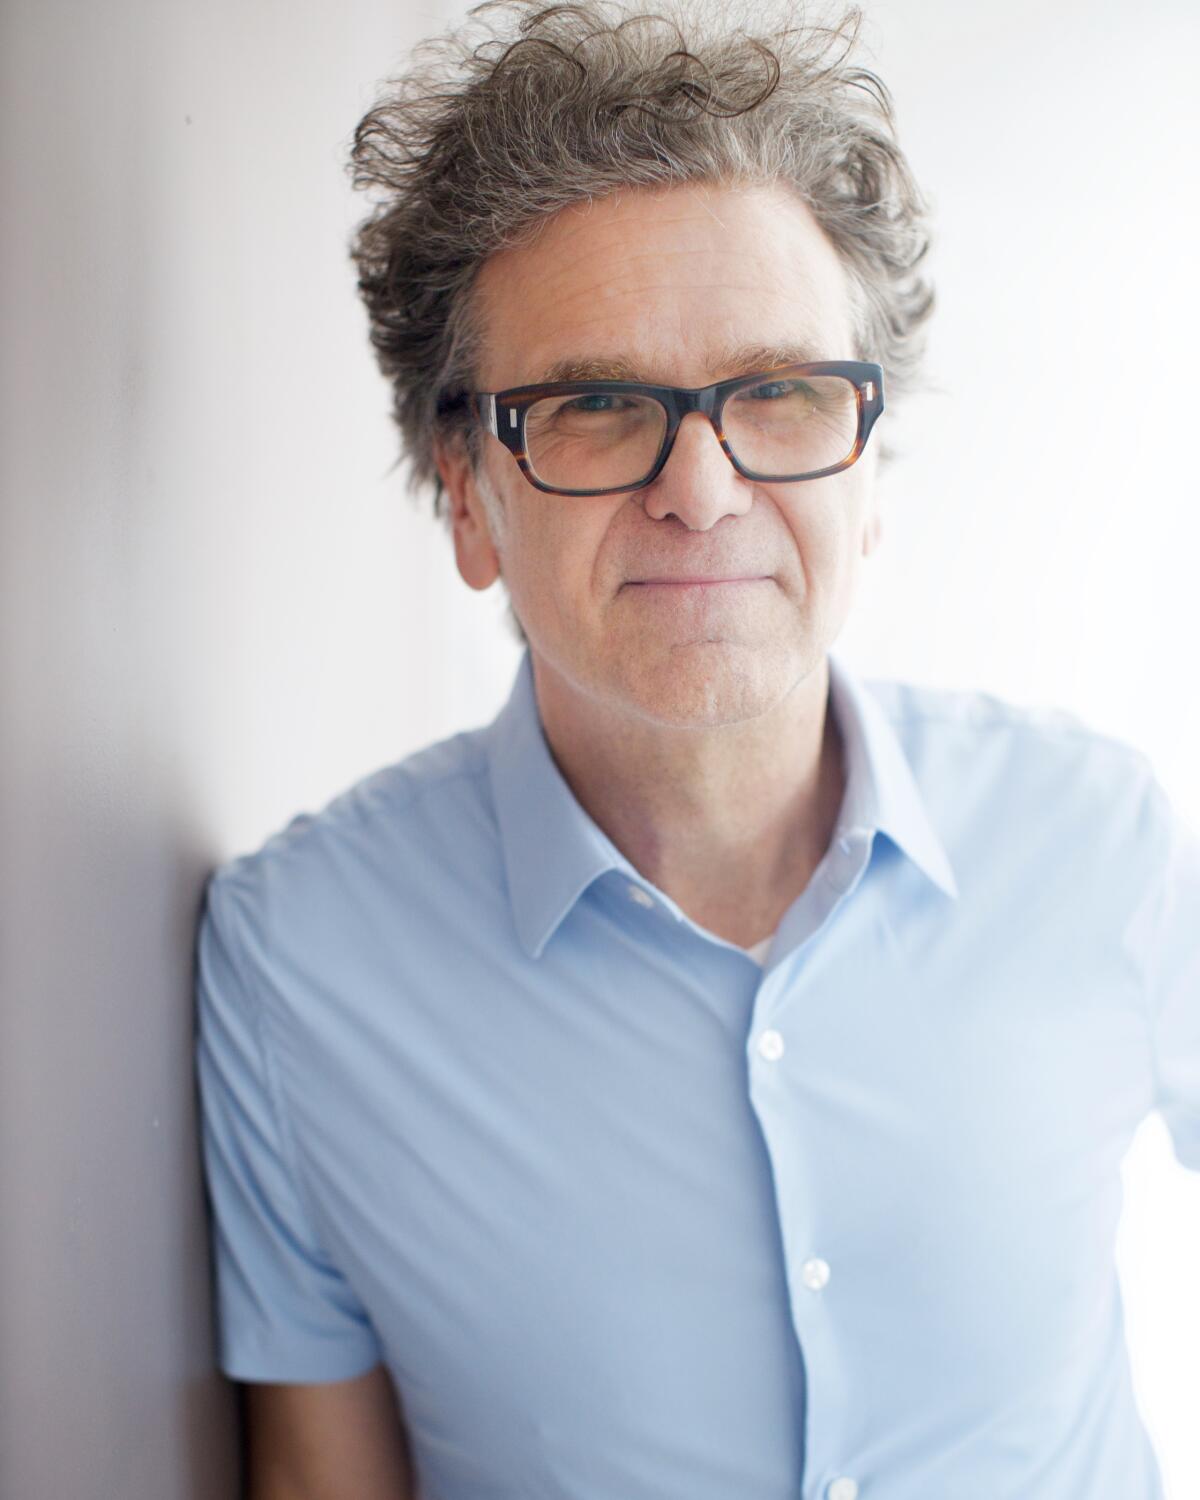 A man with wild hair wears dark-rimmed glasses and a blue shirt and leans against a wall.